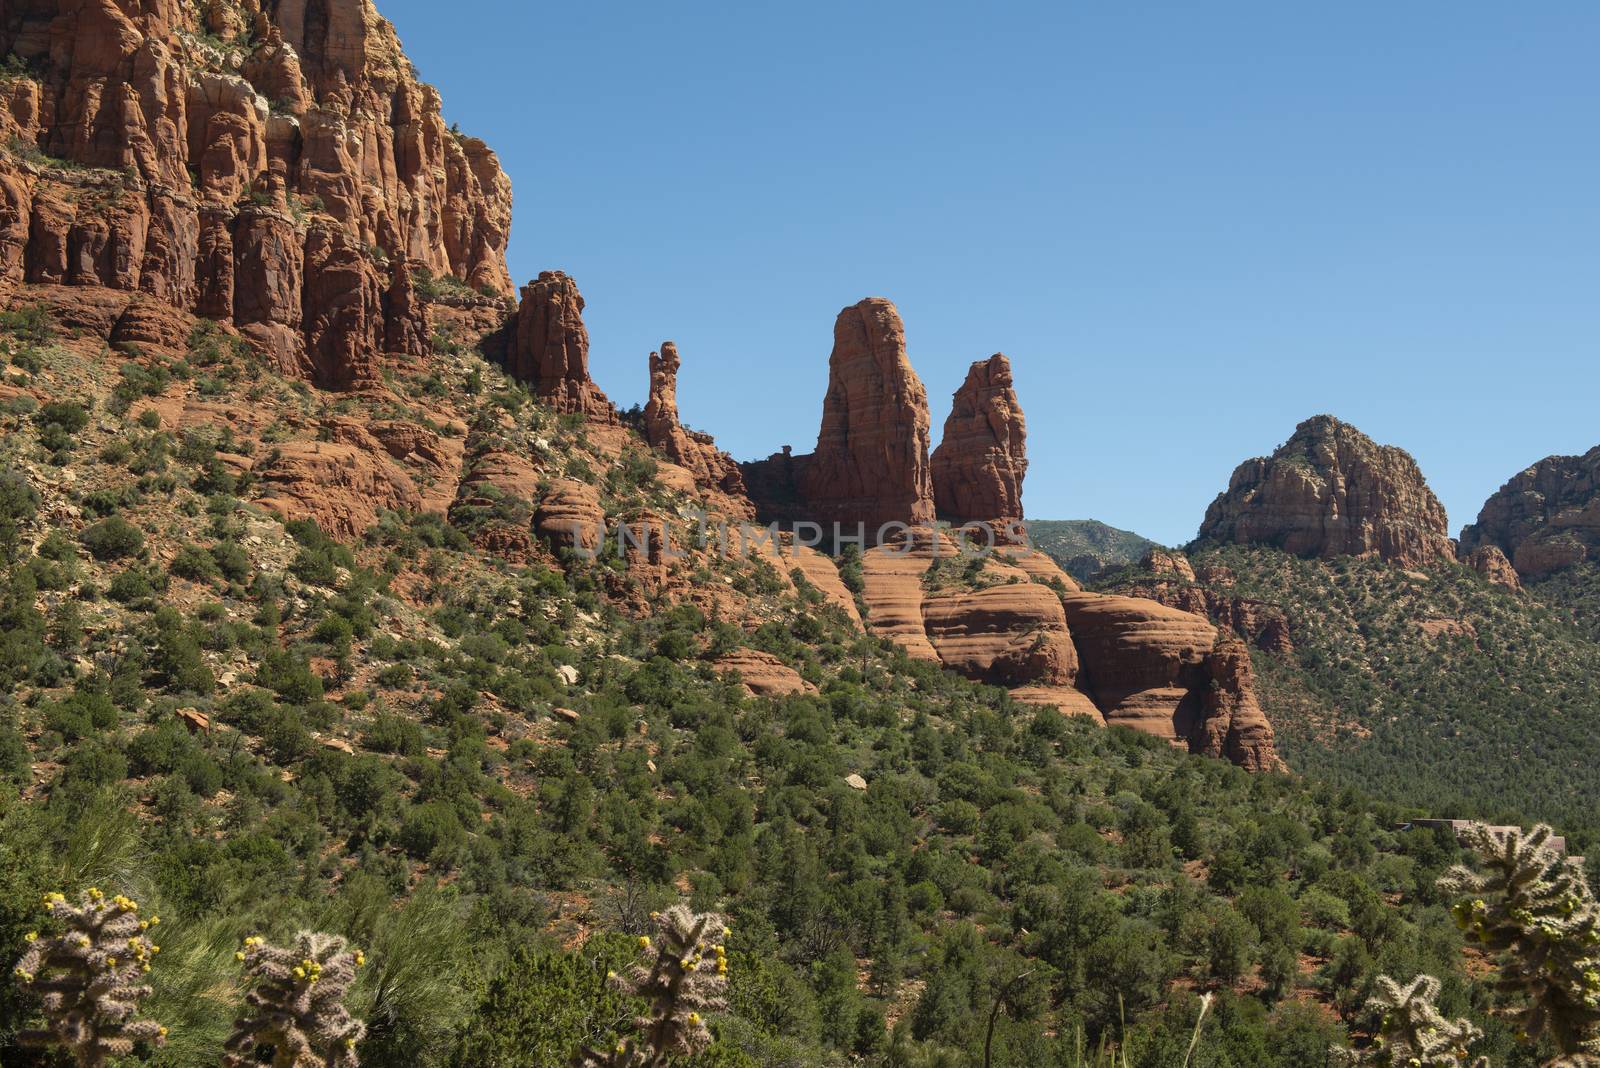 View of the Two Nuns and the Madonna and Child formations in Sedona, Arizona